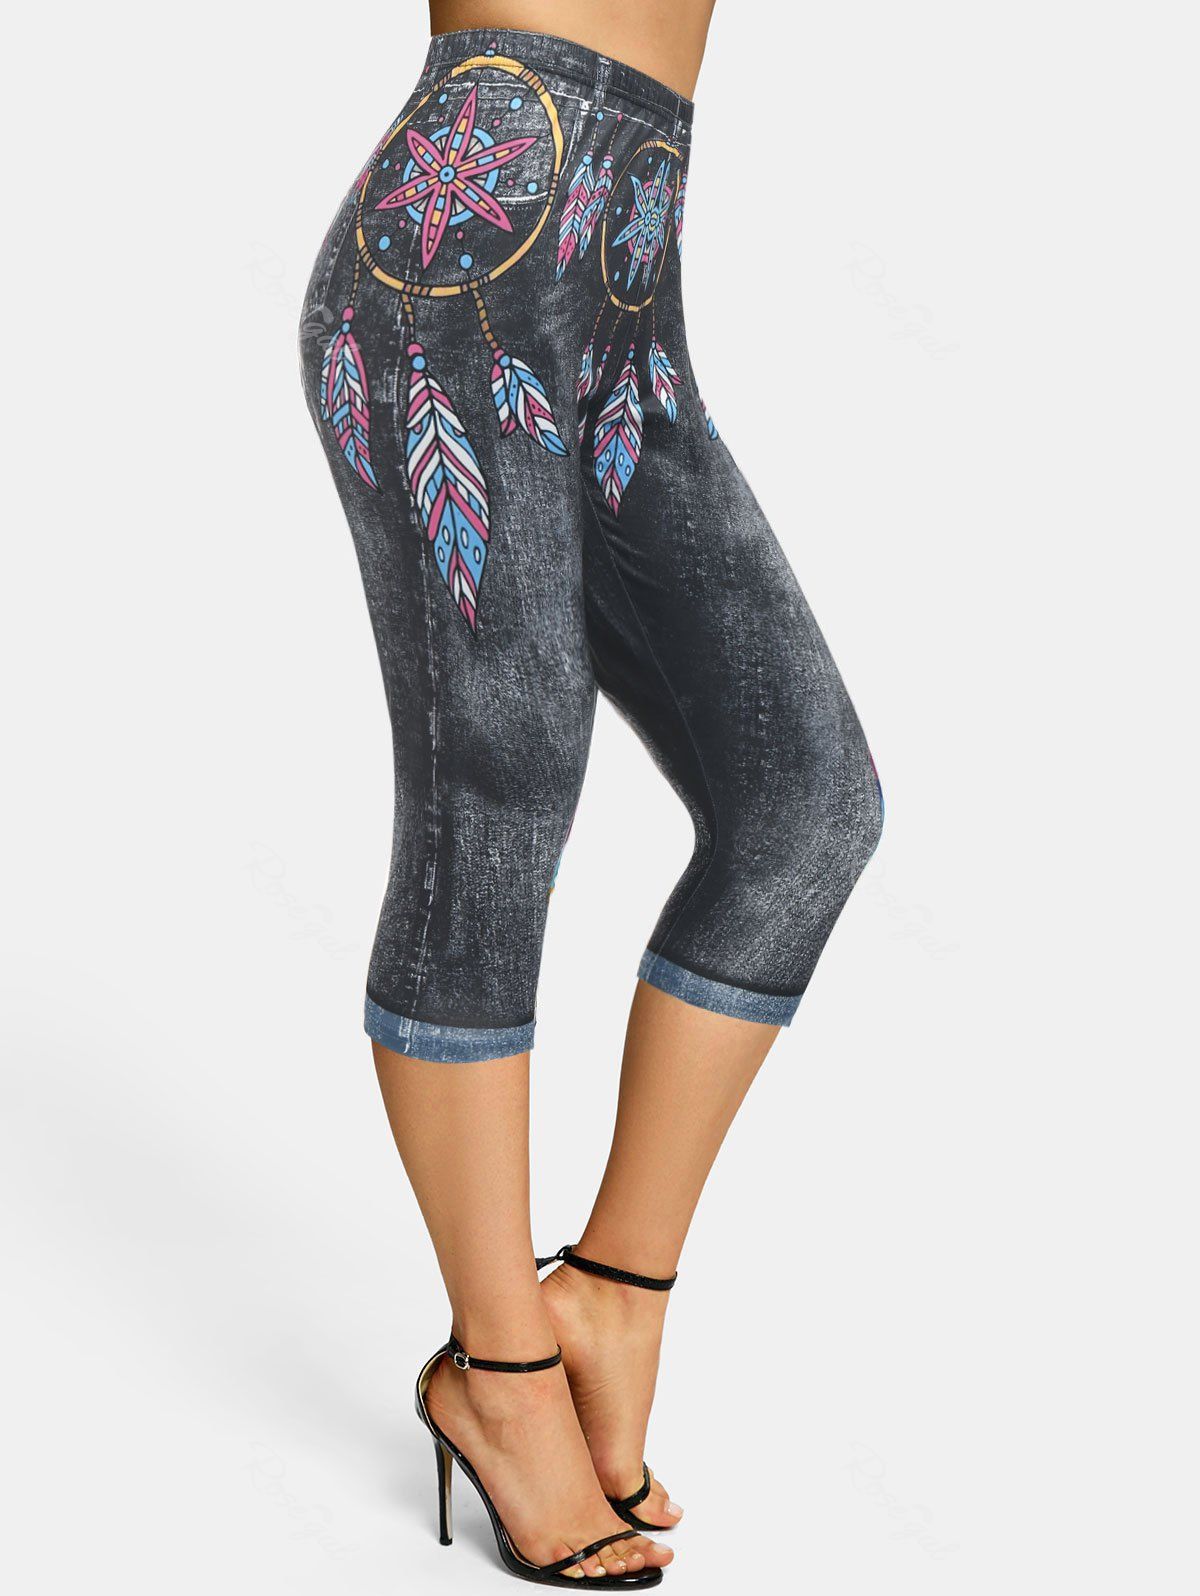 Discount Dream Catcher 3D Printed Skinny Jeggings  